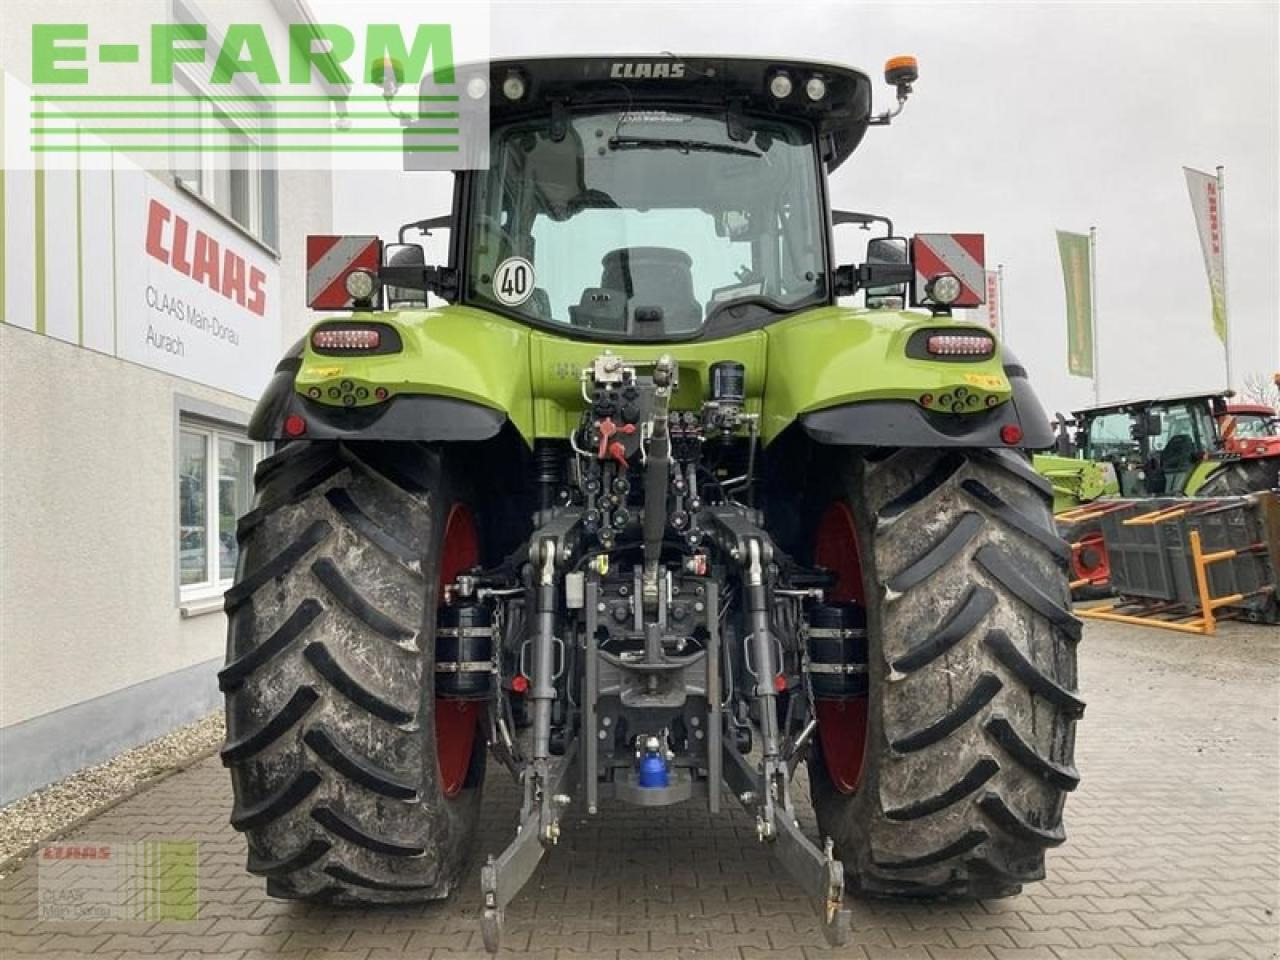 Farm tractor CLAAS axion 830 cmatic st5 cebis: picture 12